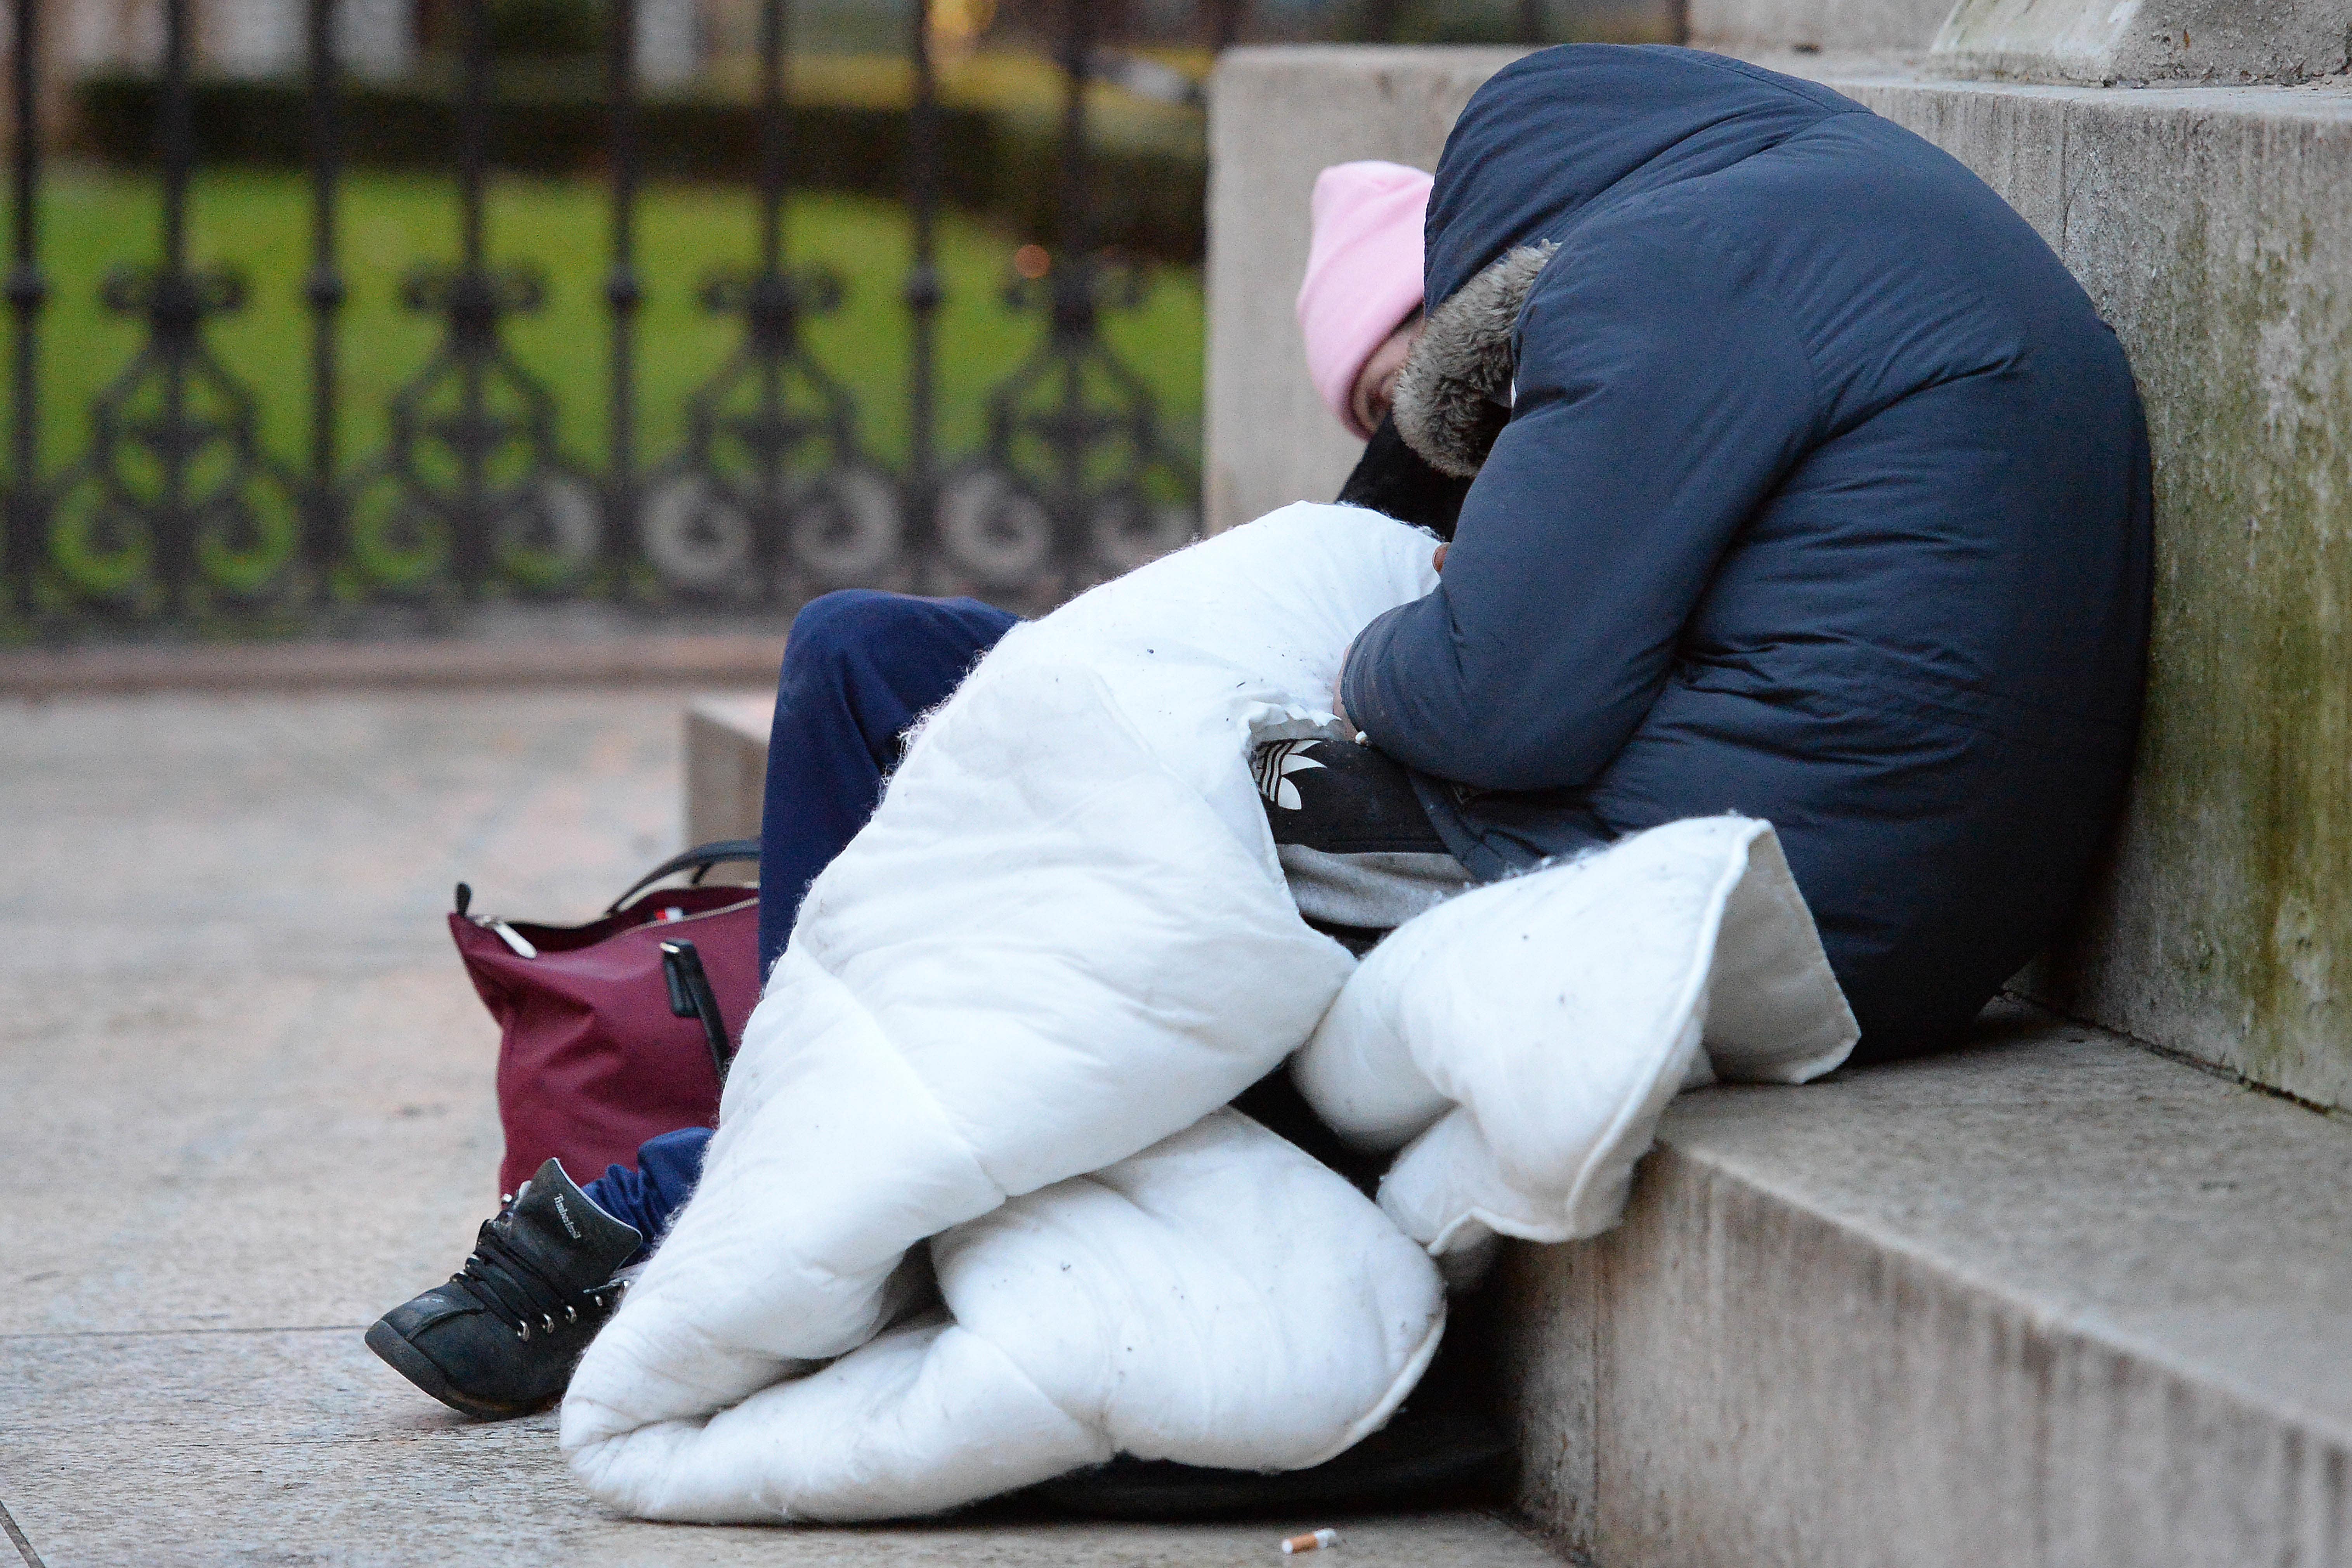 A report has warned the deadline for ending rough sleeping by the end of this parliament will not be met